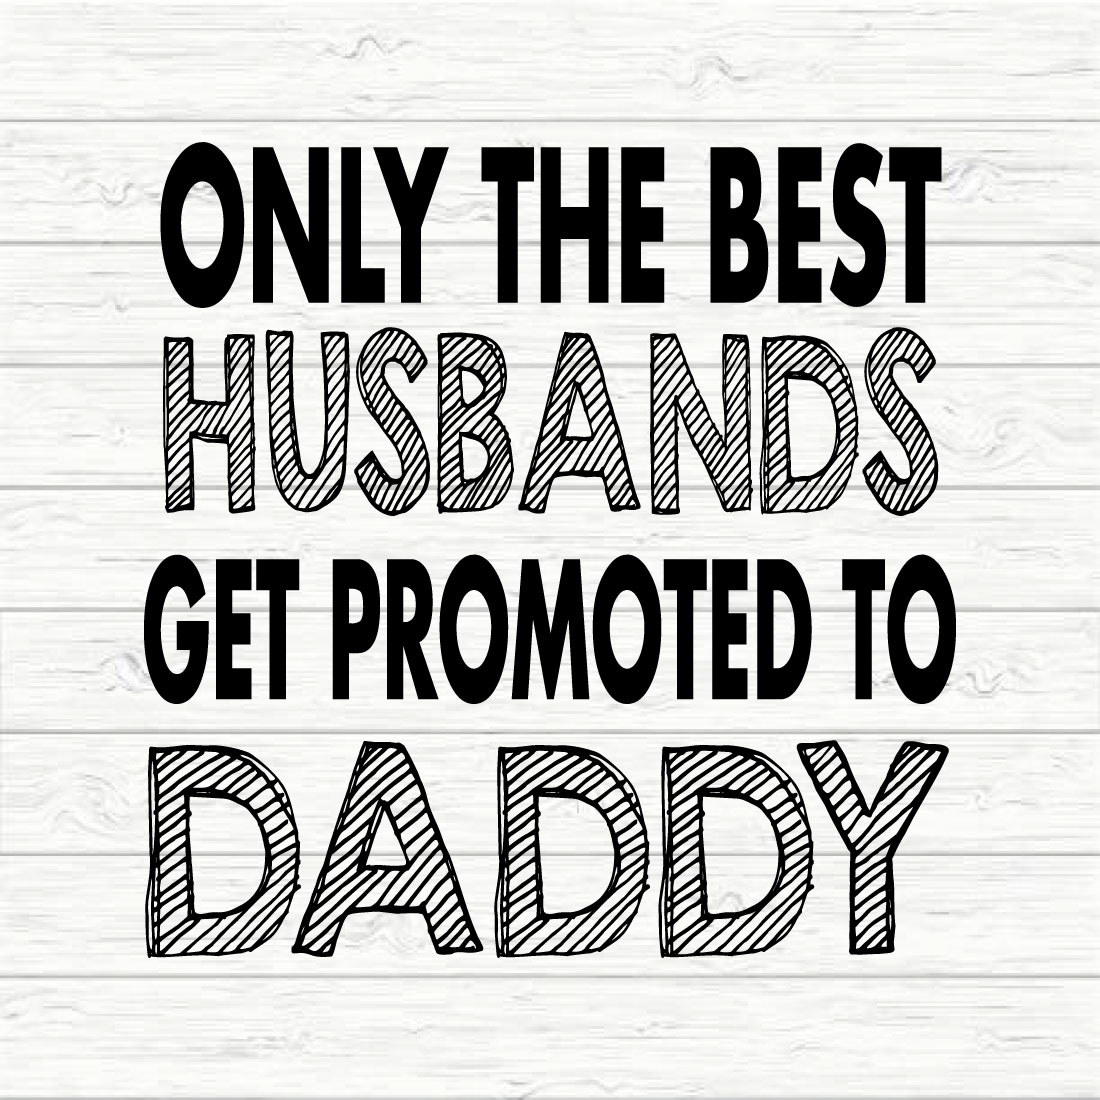 Only The Best Husbands Get Promoted To Daddy cover image.